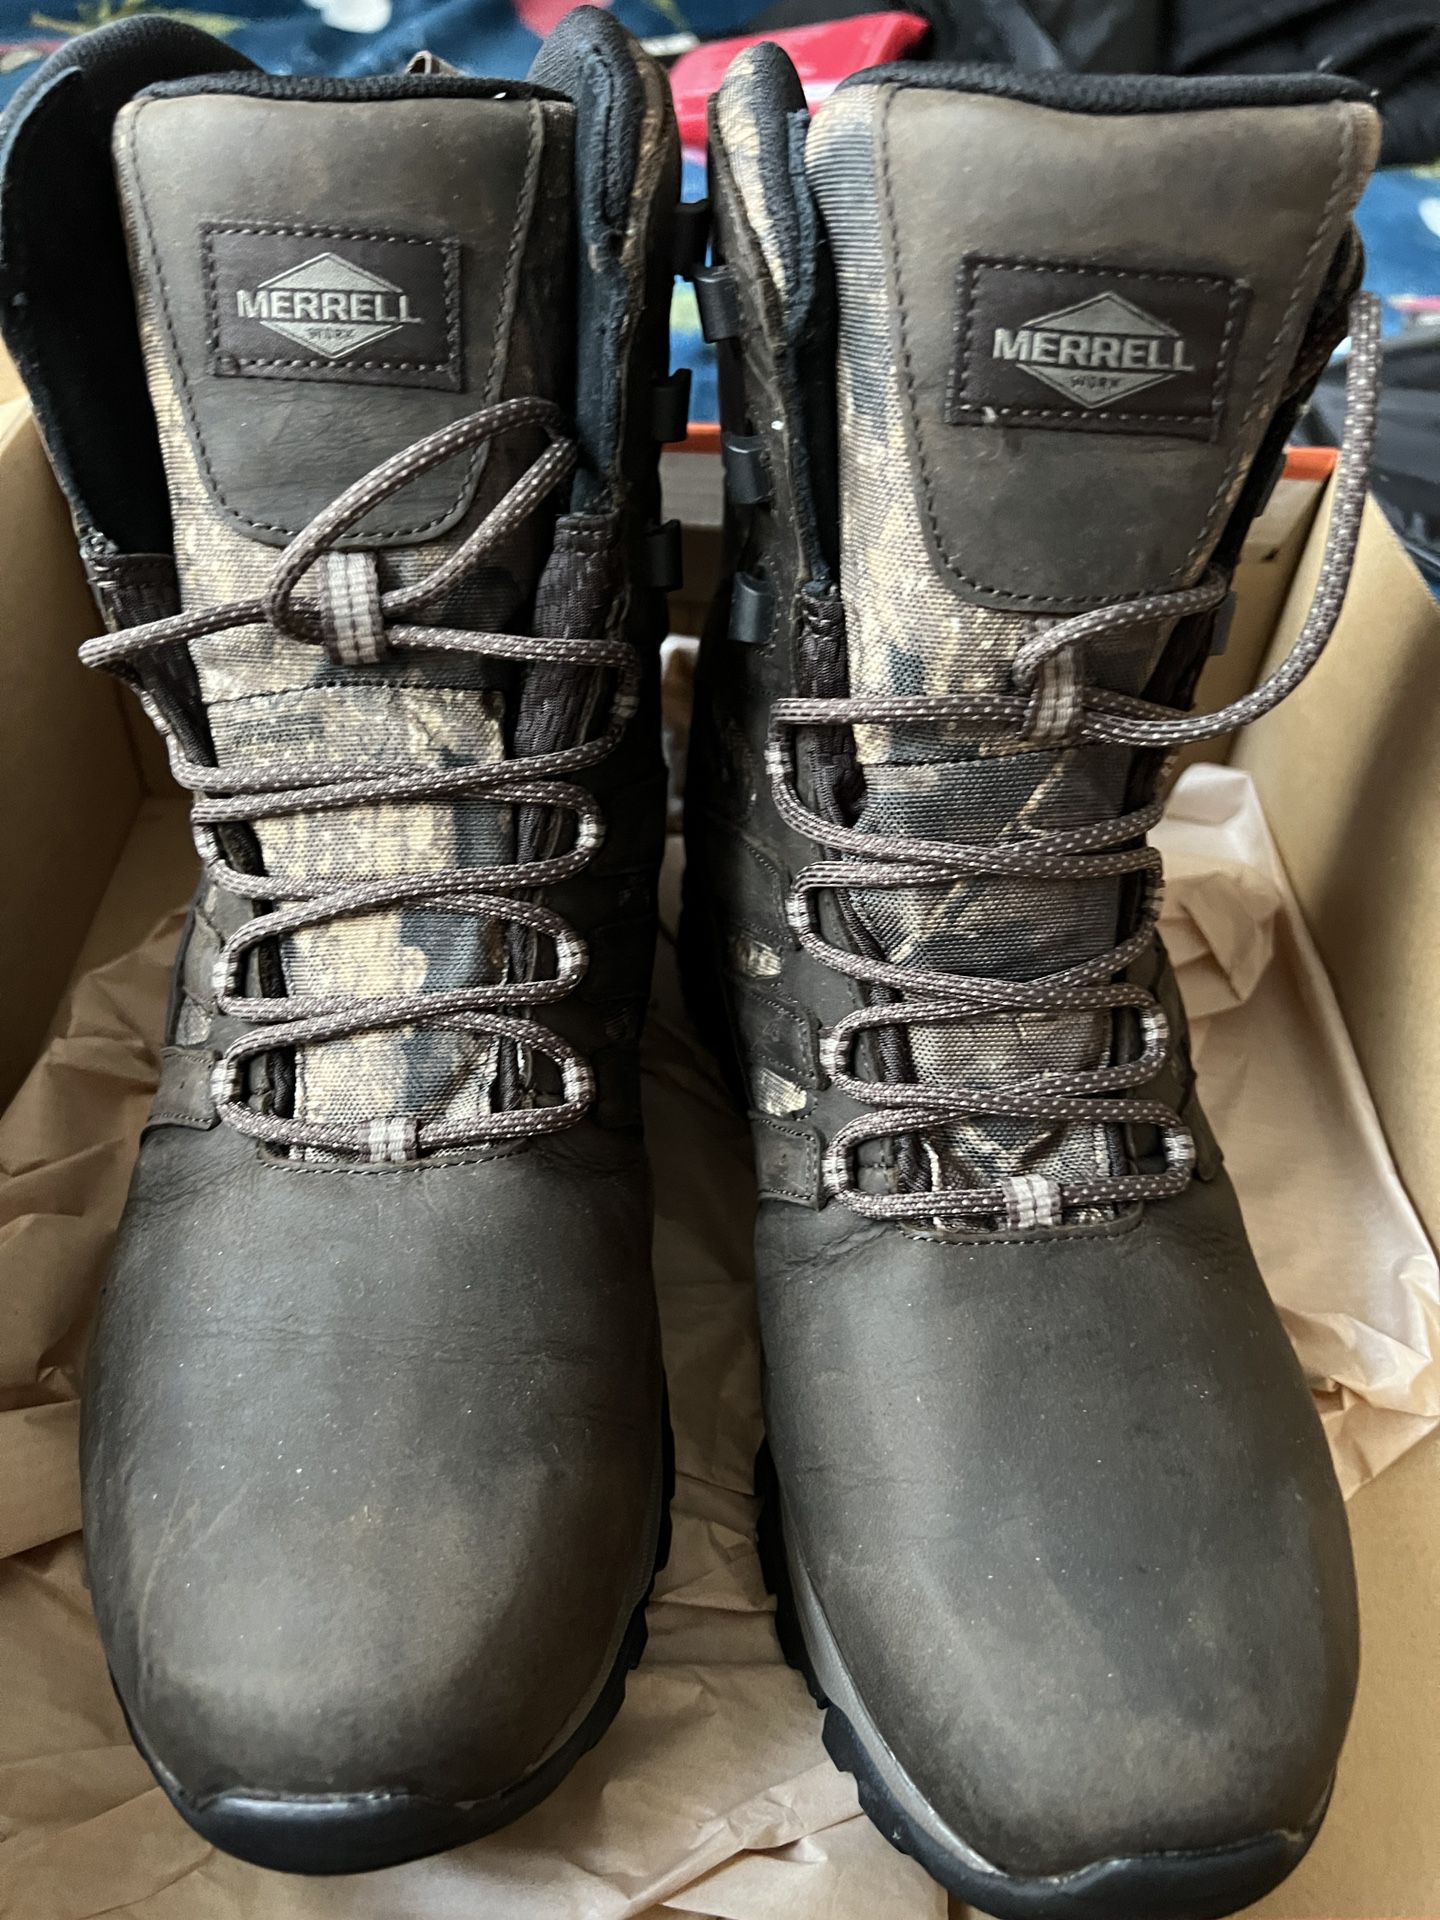 Men's Merrell Moab Timber Thermo 8" WatP SR Work Boots, J099499 Multi Sizes Camo